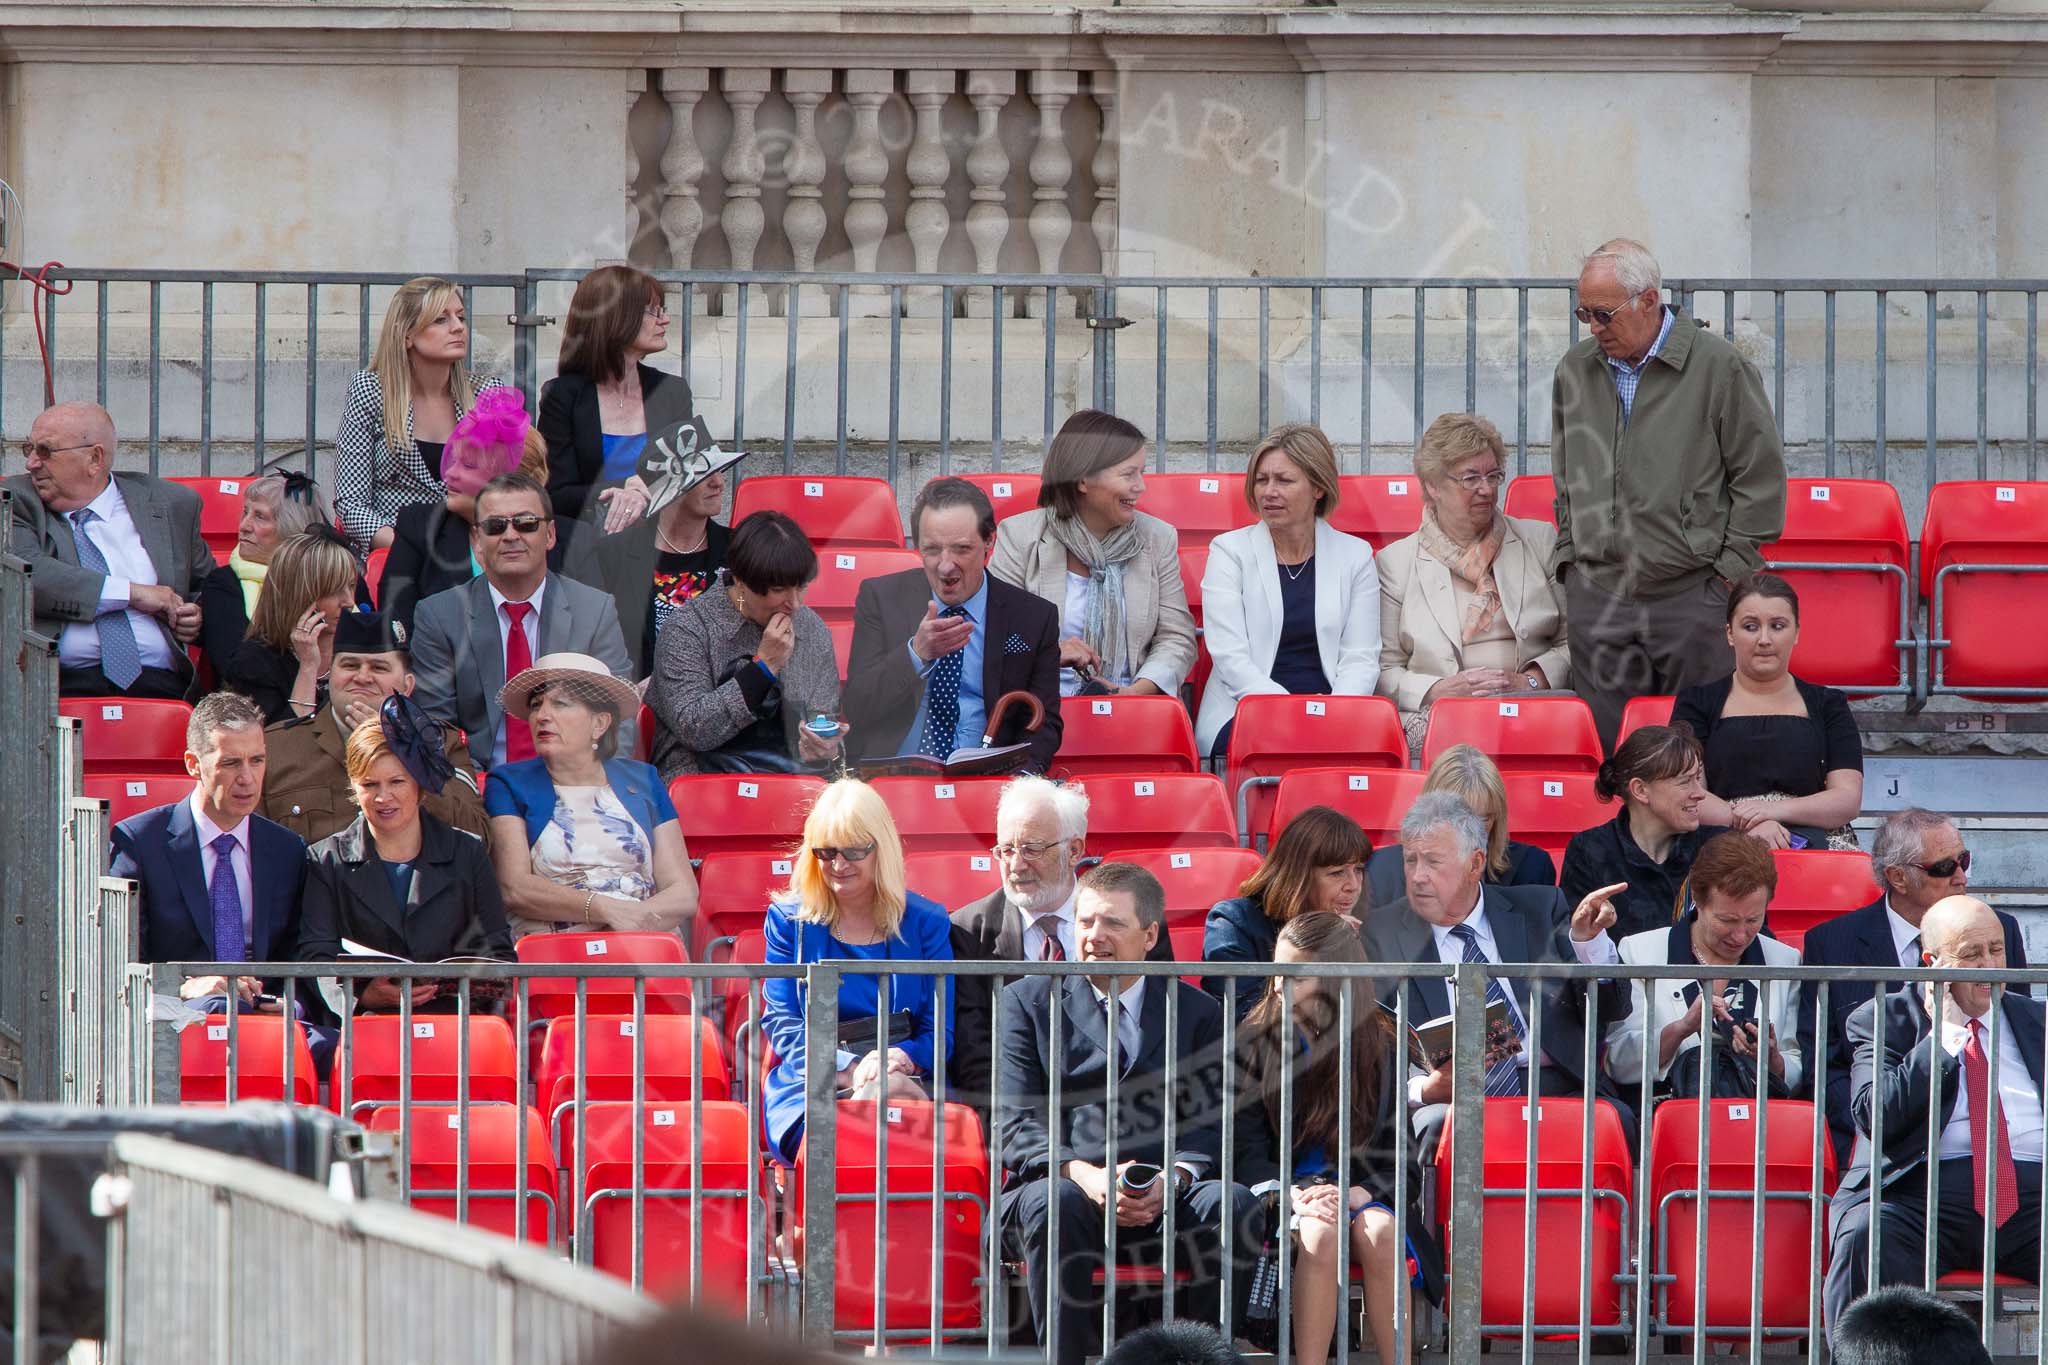 Trooping the Colour 2013 (spectators): Spectators arriving at Horse Guards Arch. Image #961, 15 June 2013 09:36